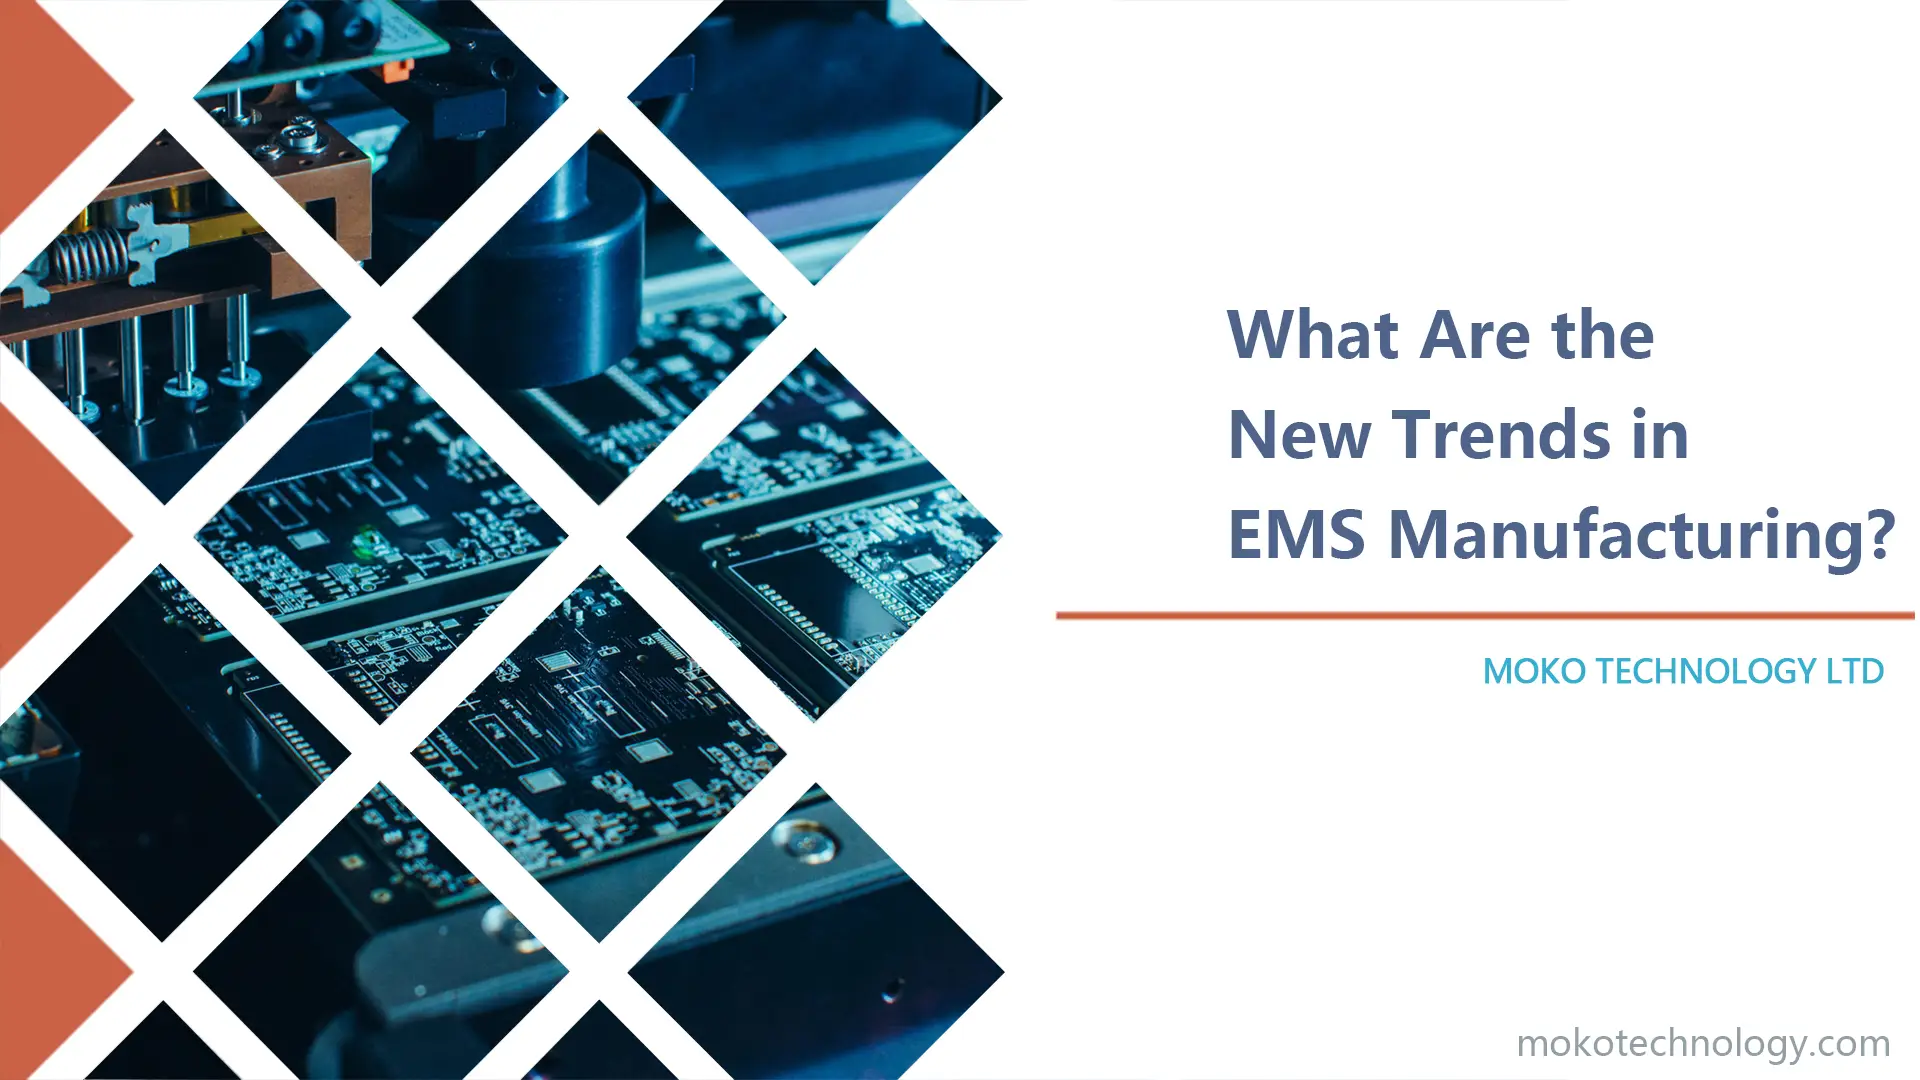 What Are the New Trends in EMS Manufacturing